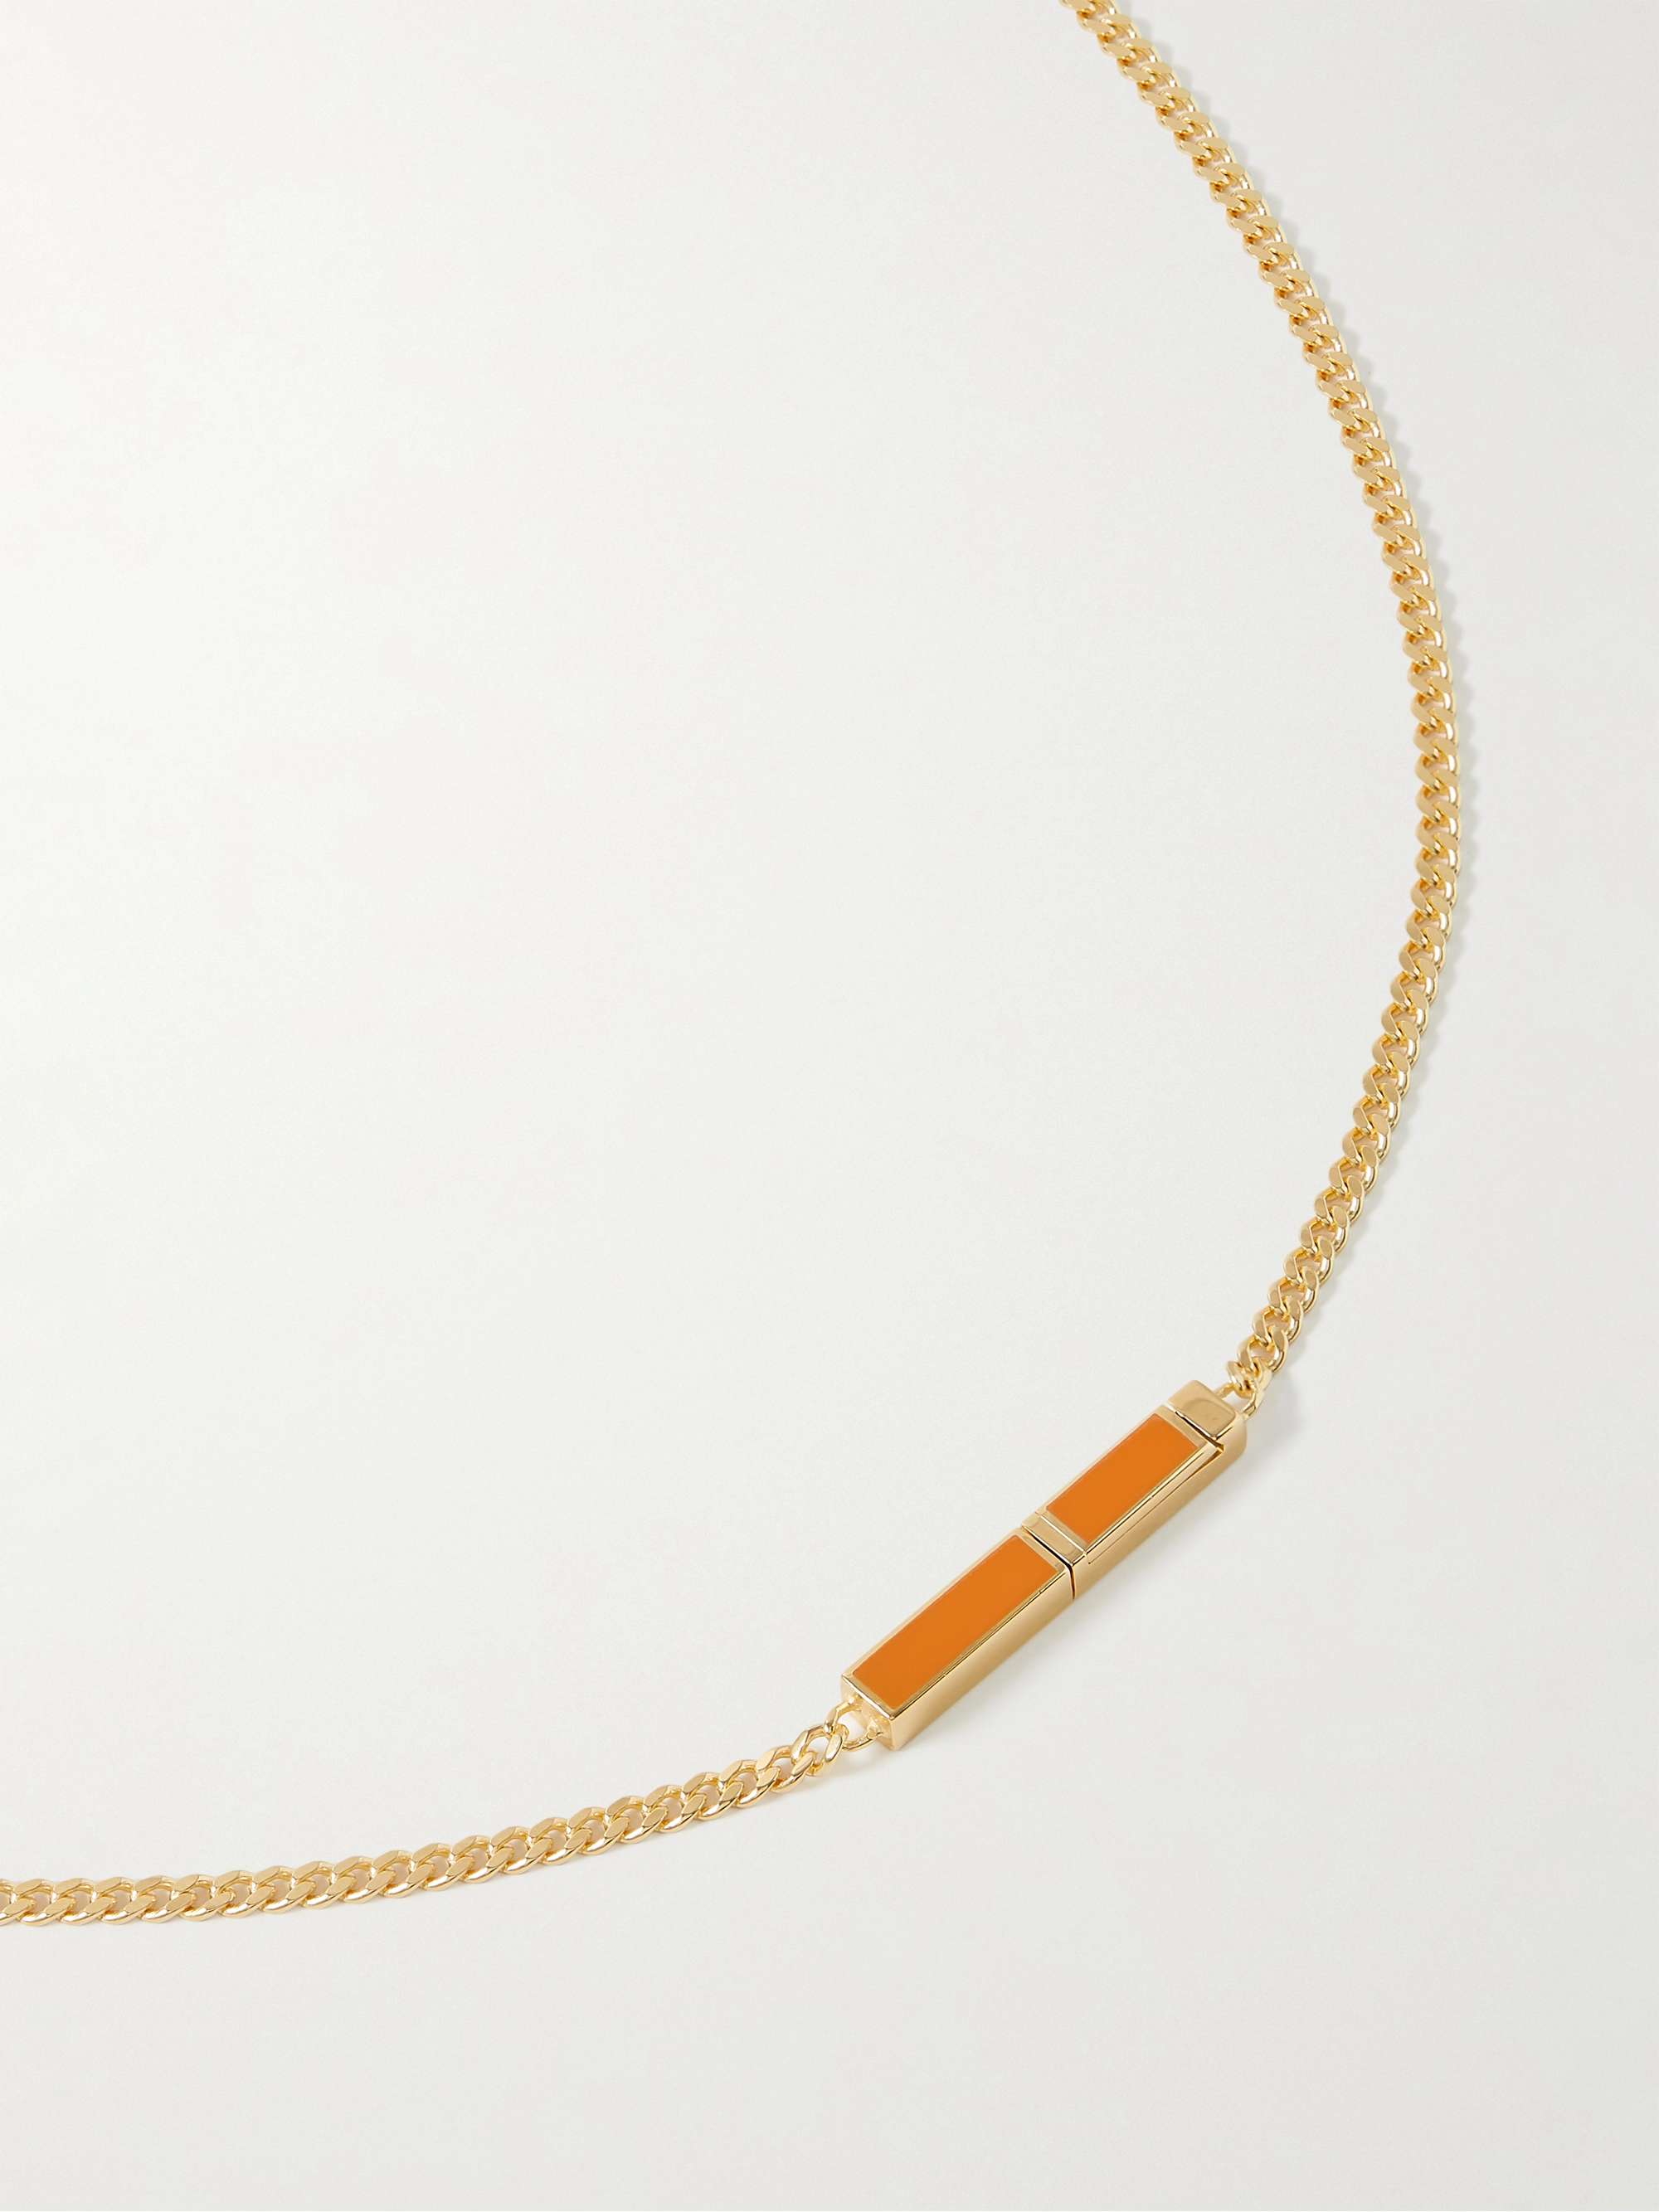 Script Initial on White Enamel Pendant Necklace from RIVA New York